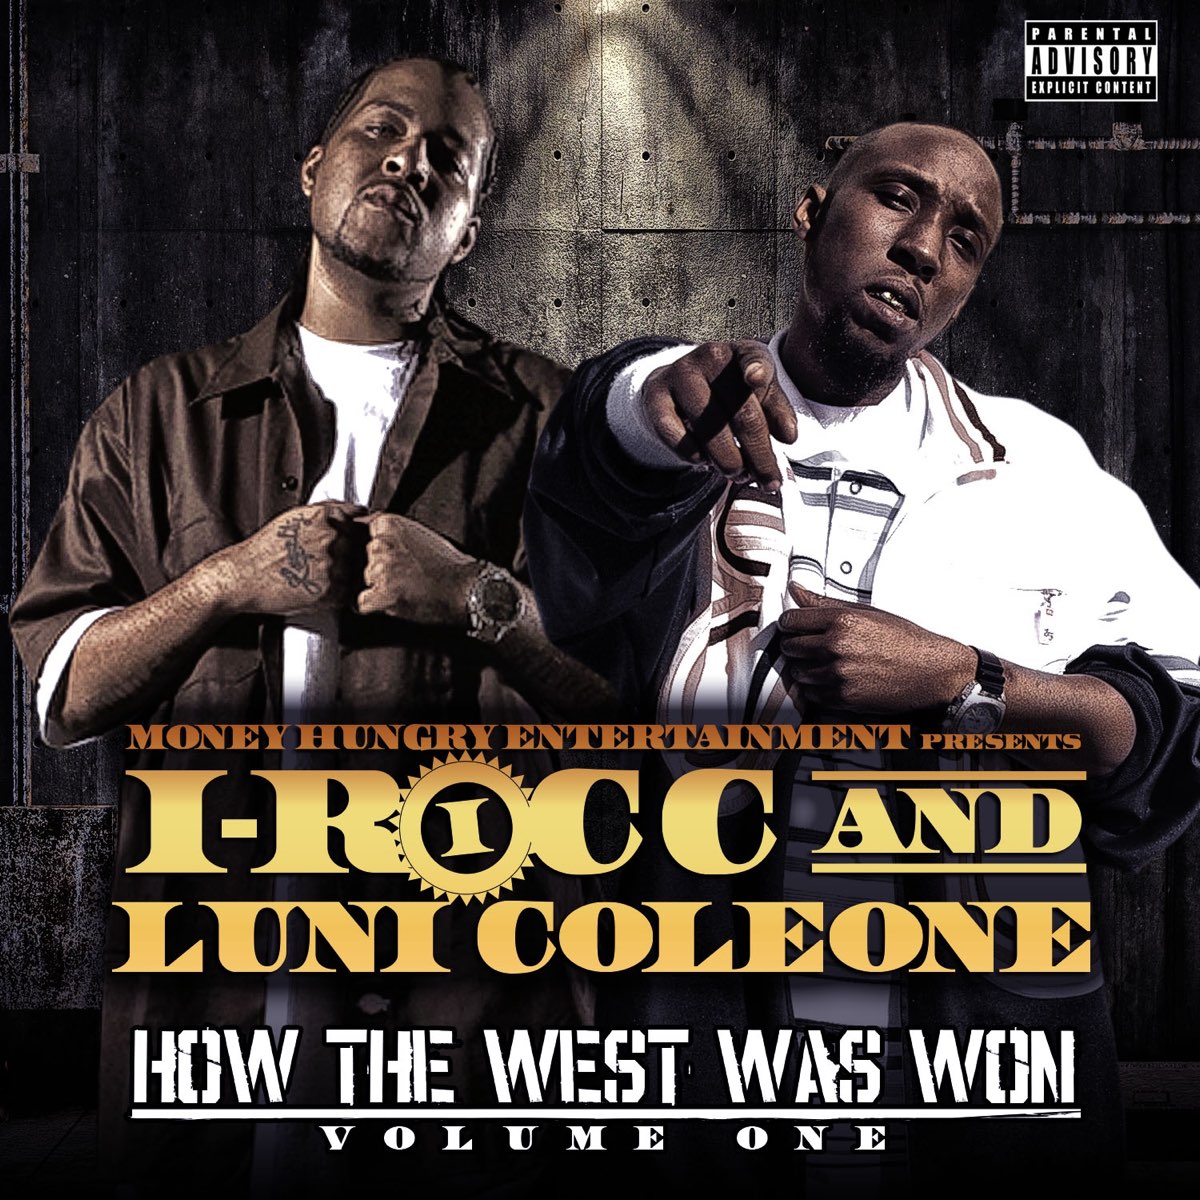 I-Rocc & Luni Coleone - How The West Was Won, Vol. 1 Compilation